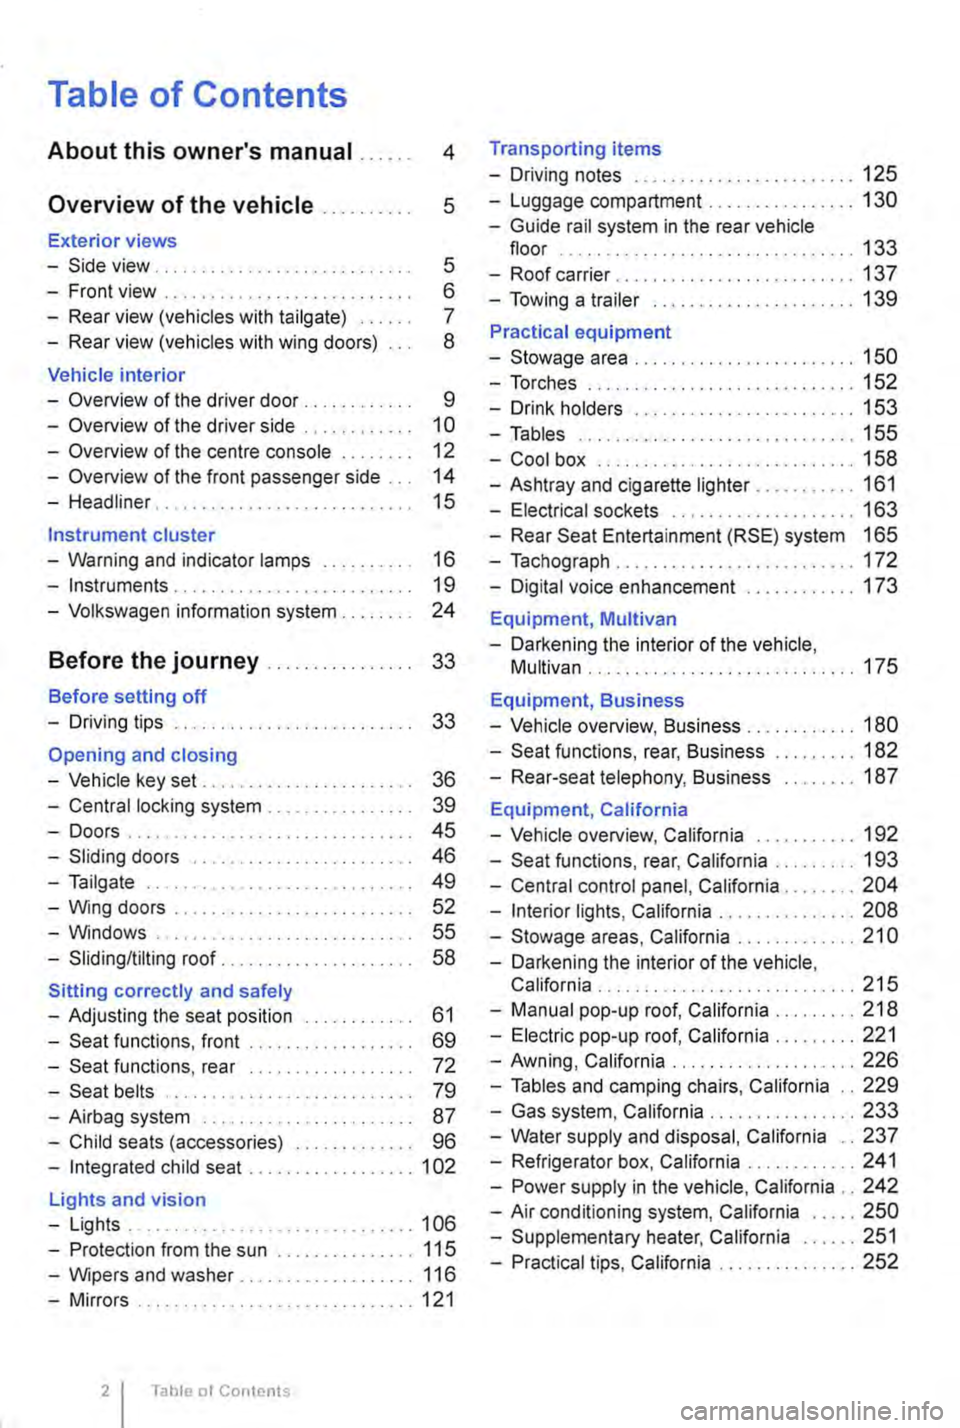 VOLKSWAGEN TRANSPORTER 2015  Owner´s Manual Table of Contents 
About this owners manual . . . . . . 4 
Overview of the vehicle . . . . . . . . . . 5 
Exterior views 
-Side view . . . . . . . . . . . . . . . . . . . . . . . . . . . . 5 
-Front 